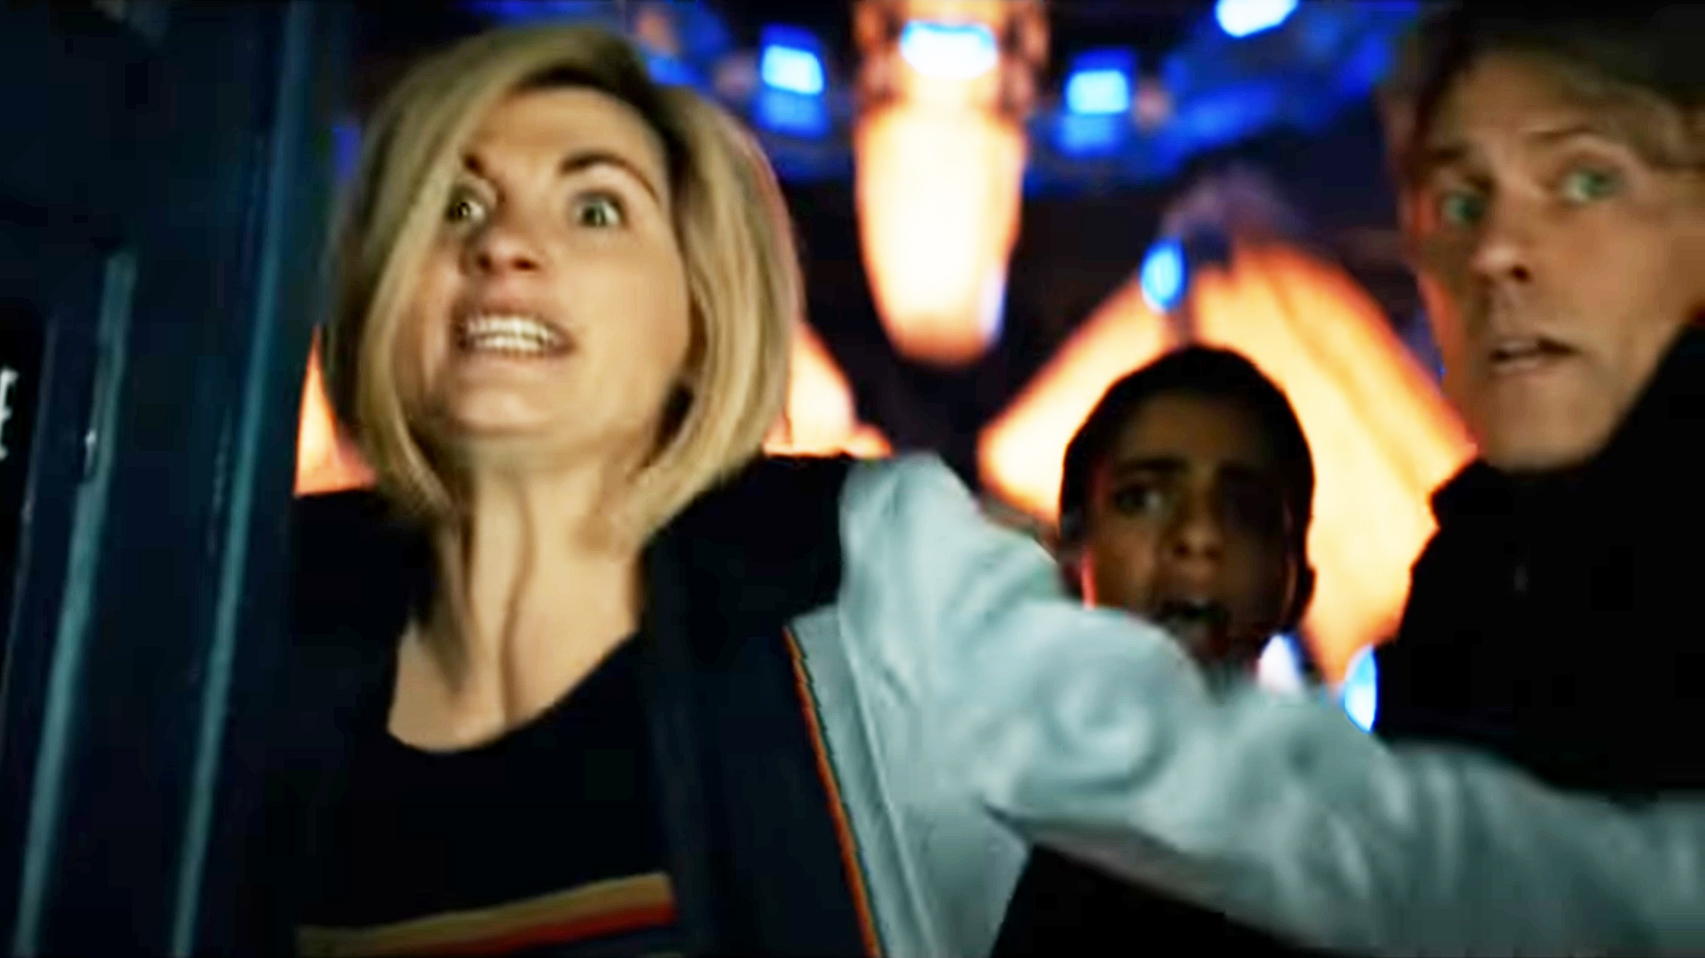 BBC Doctor Who Jodie Whitaker Series 13